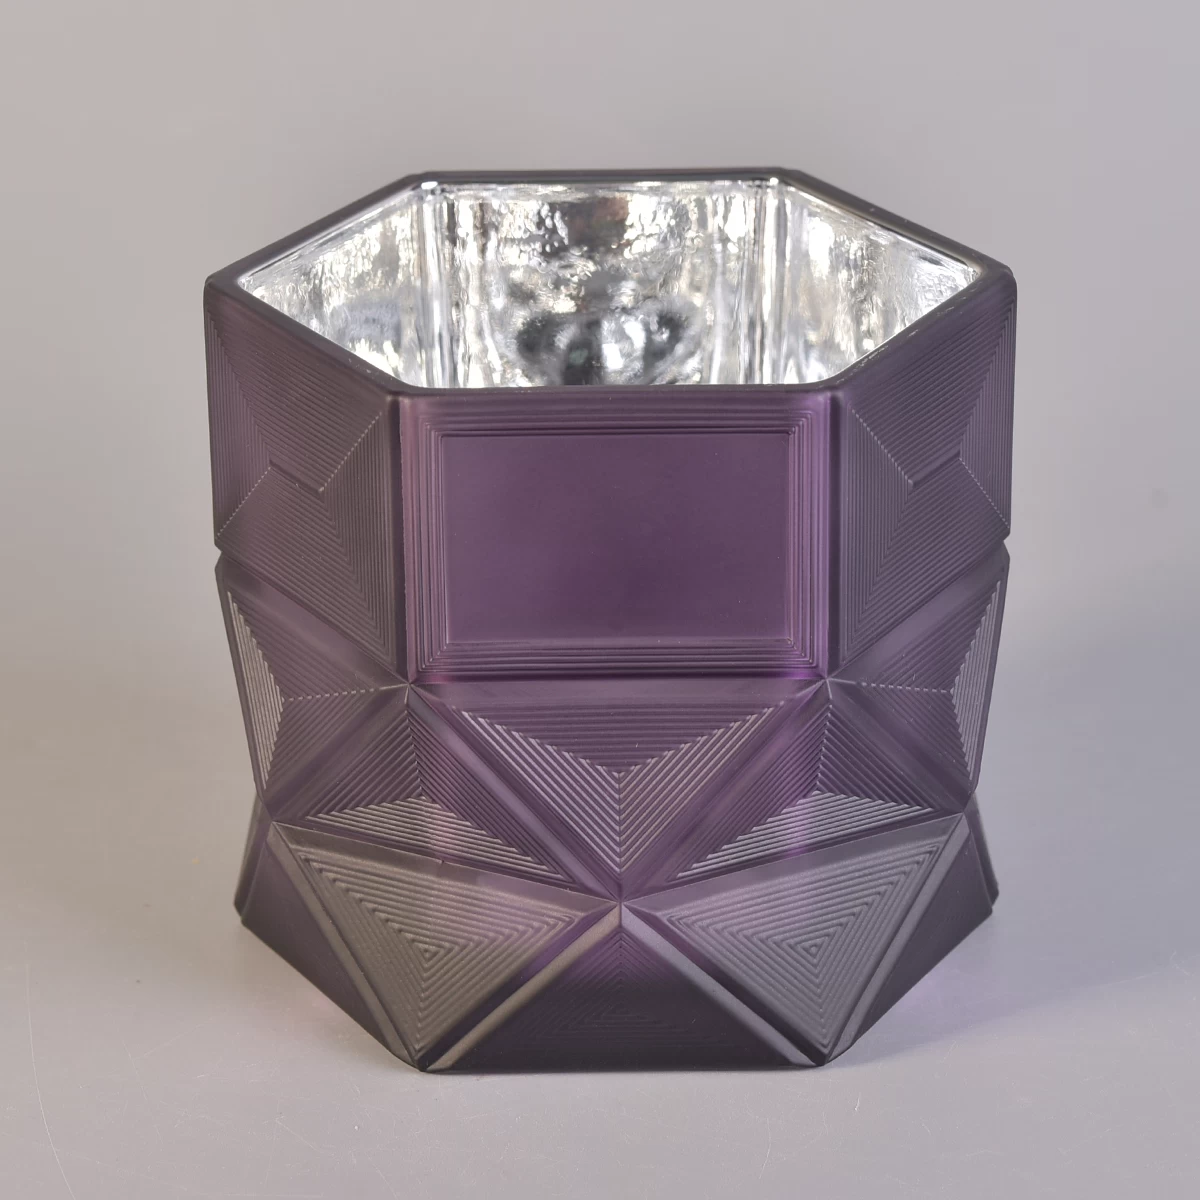 hexagon shaped luxury glass candle holder, electroplated inside glass vessels